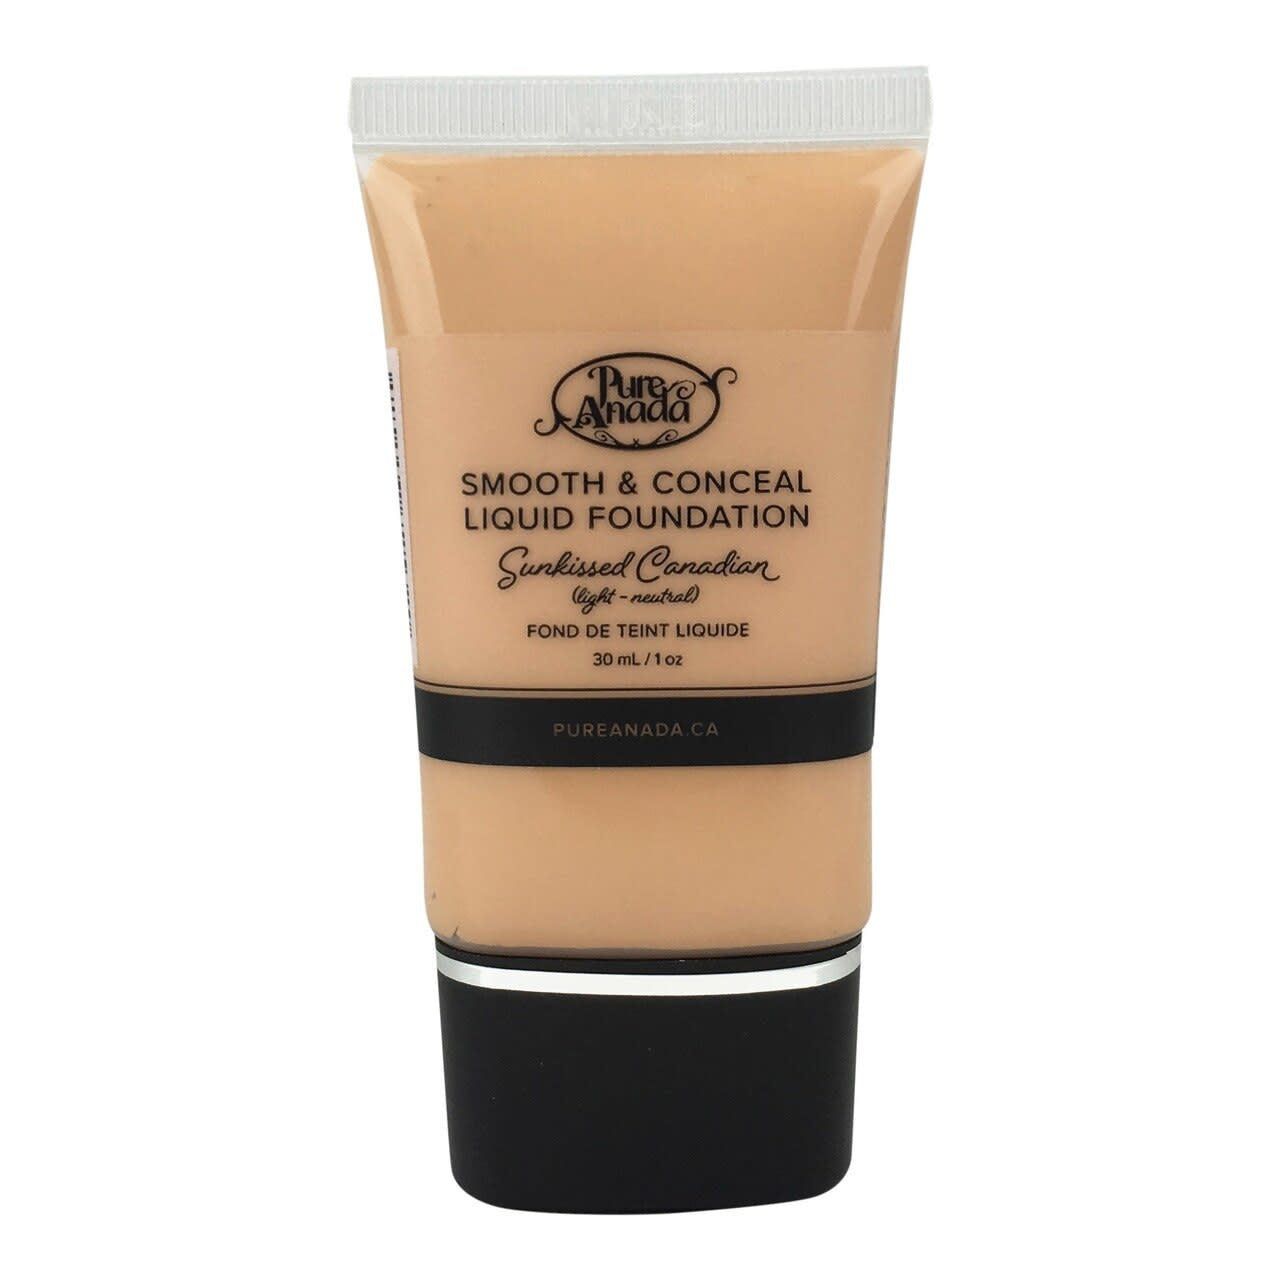 Pure Anada Smooth & Conceal Liquid Foundation - Lifestyle Markets